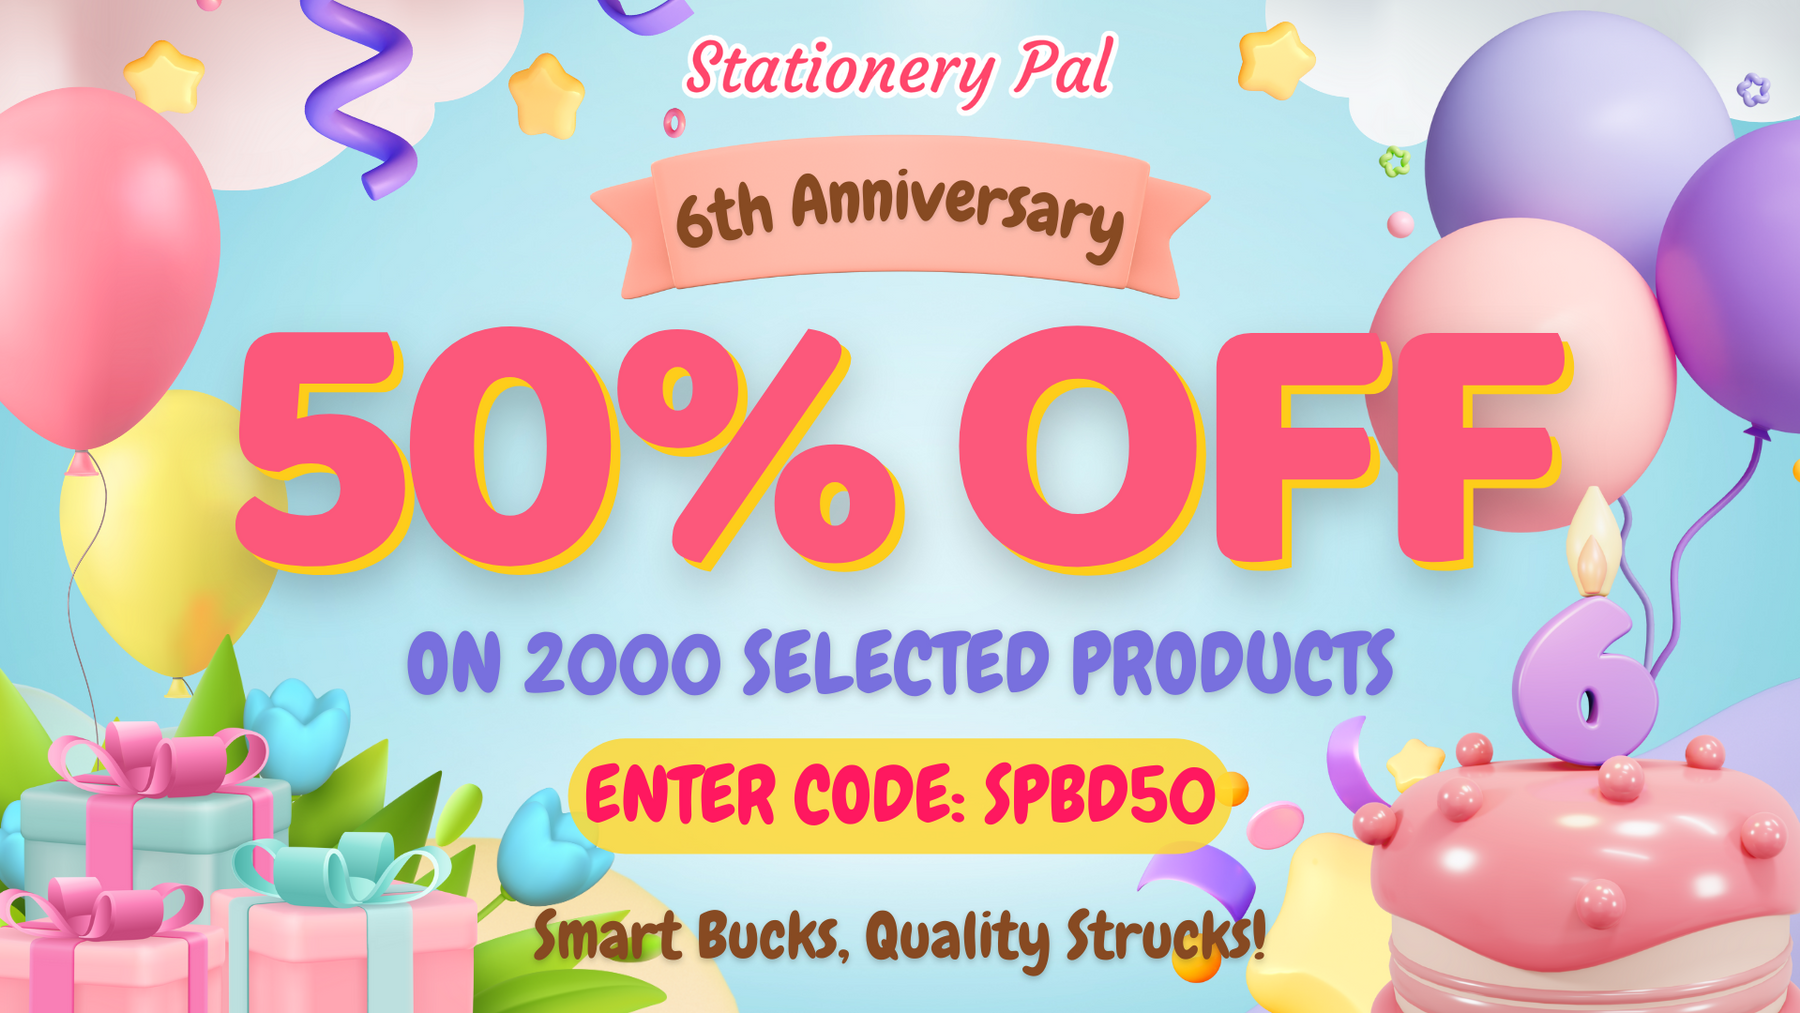 🎈Let's party with a bang! Enjoy 50% off select products!🌟